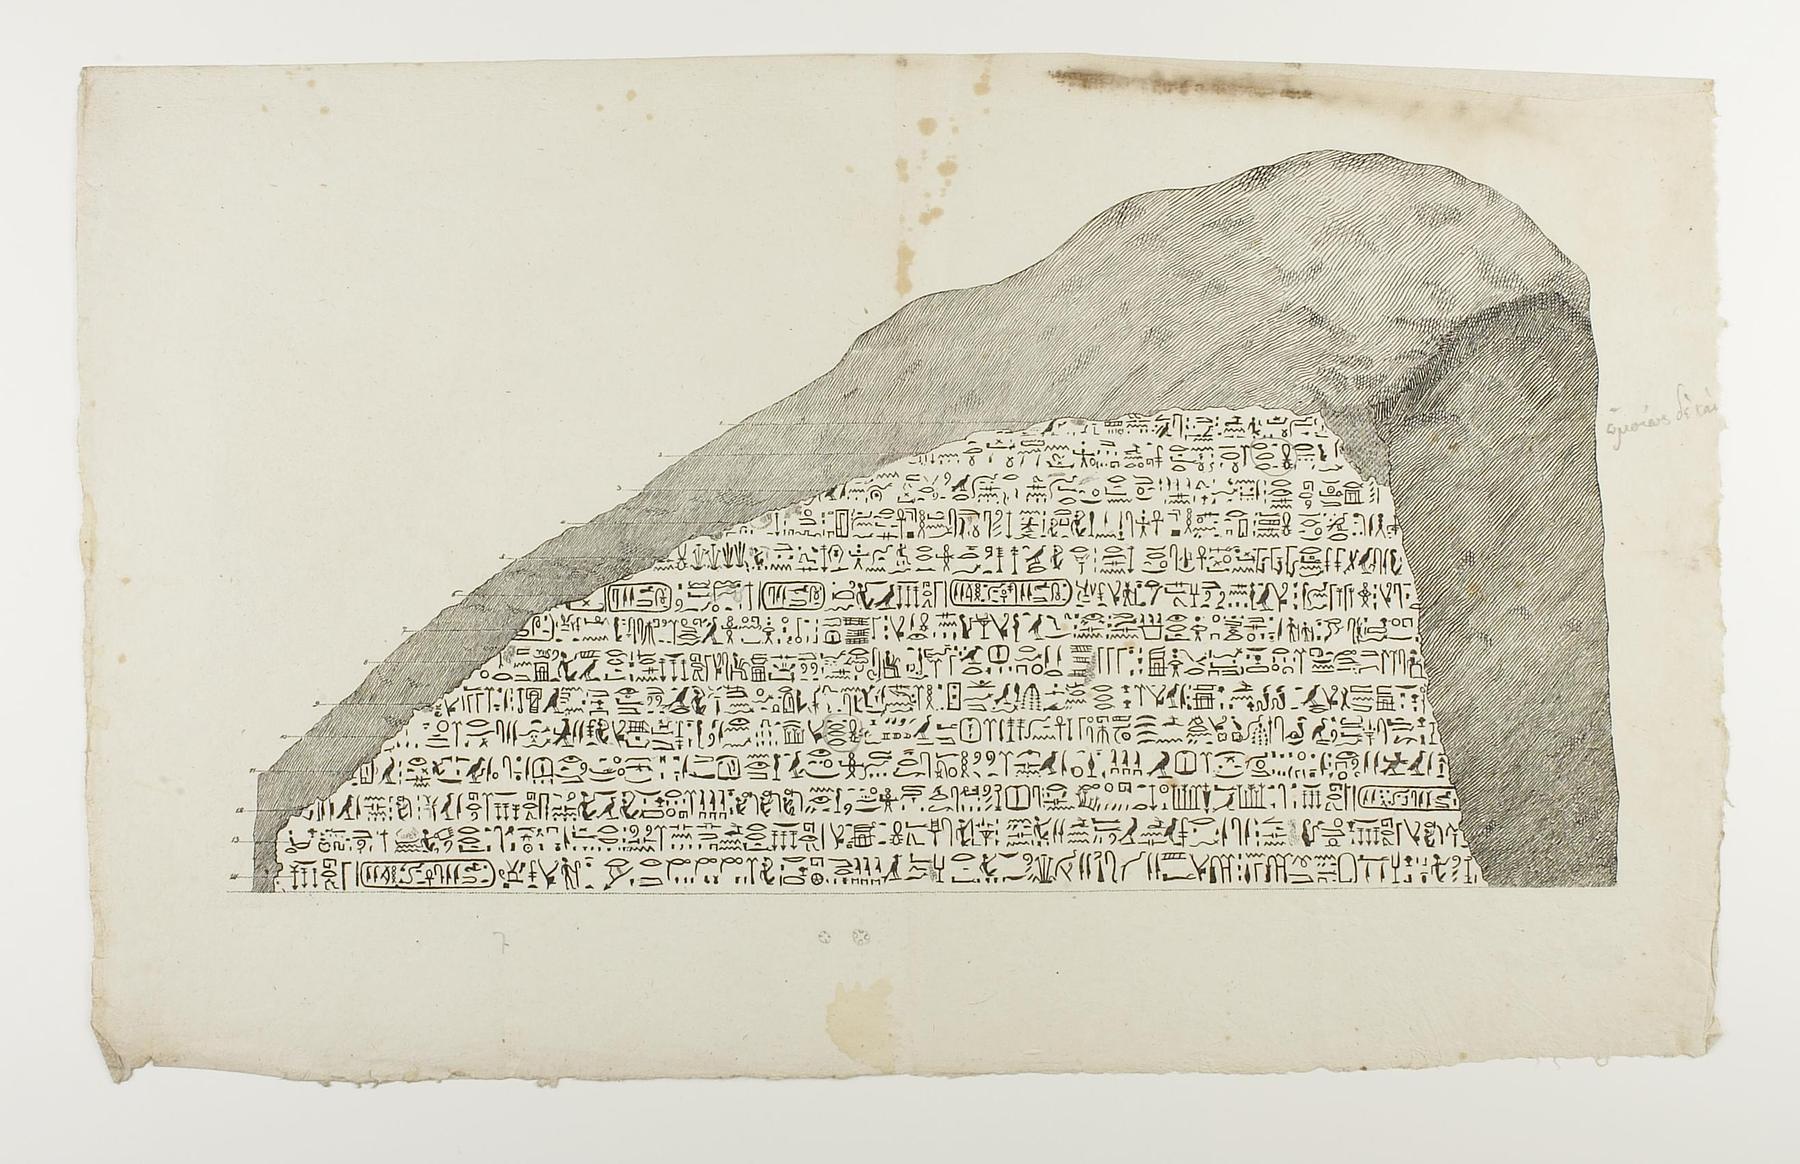 Decree, Hieroglyphic Inscription from the Rosette Stone reproduced in connction with Adolf Heinrich Friedrich Schlichtegroll's Treatise, E1338